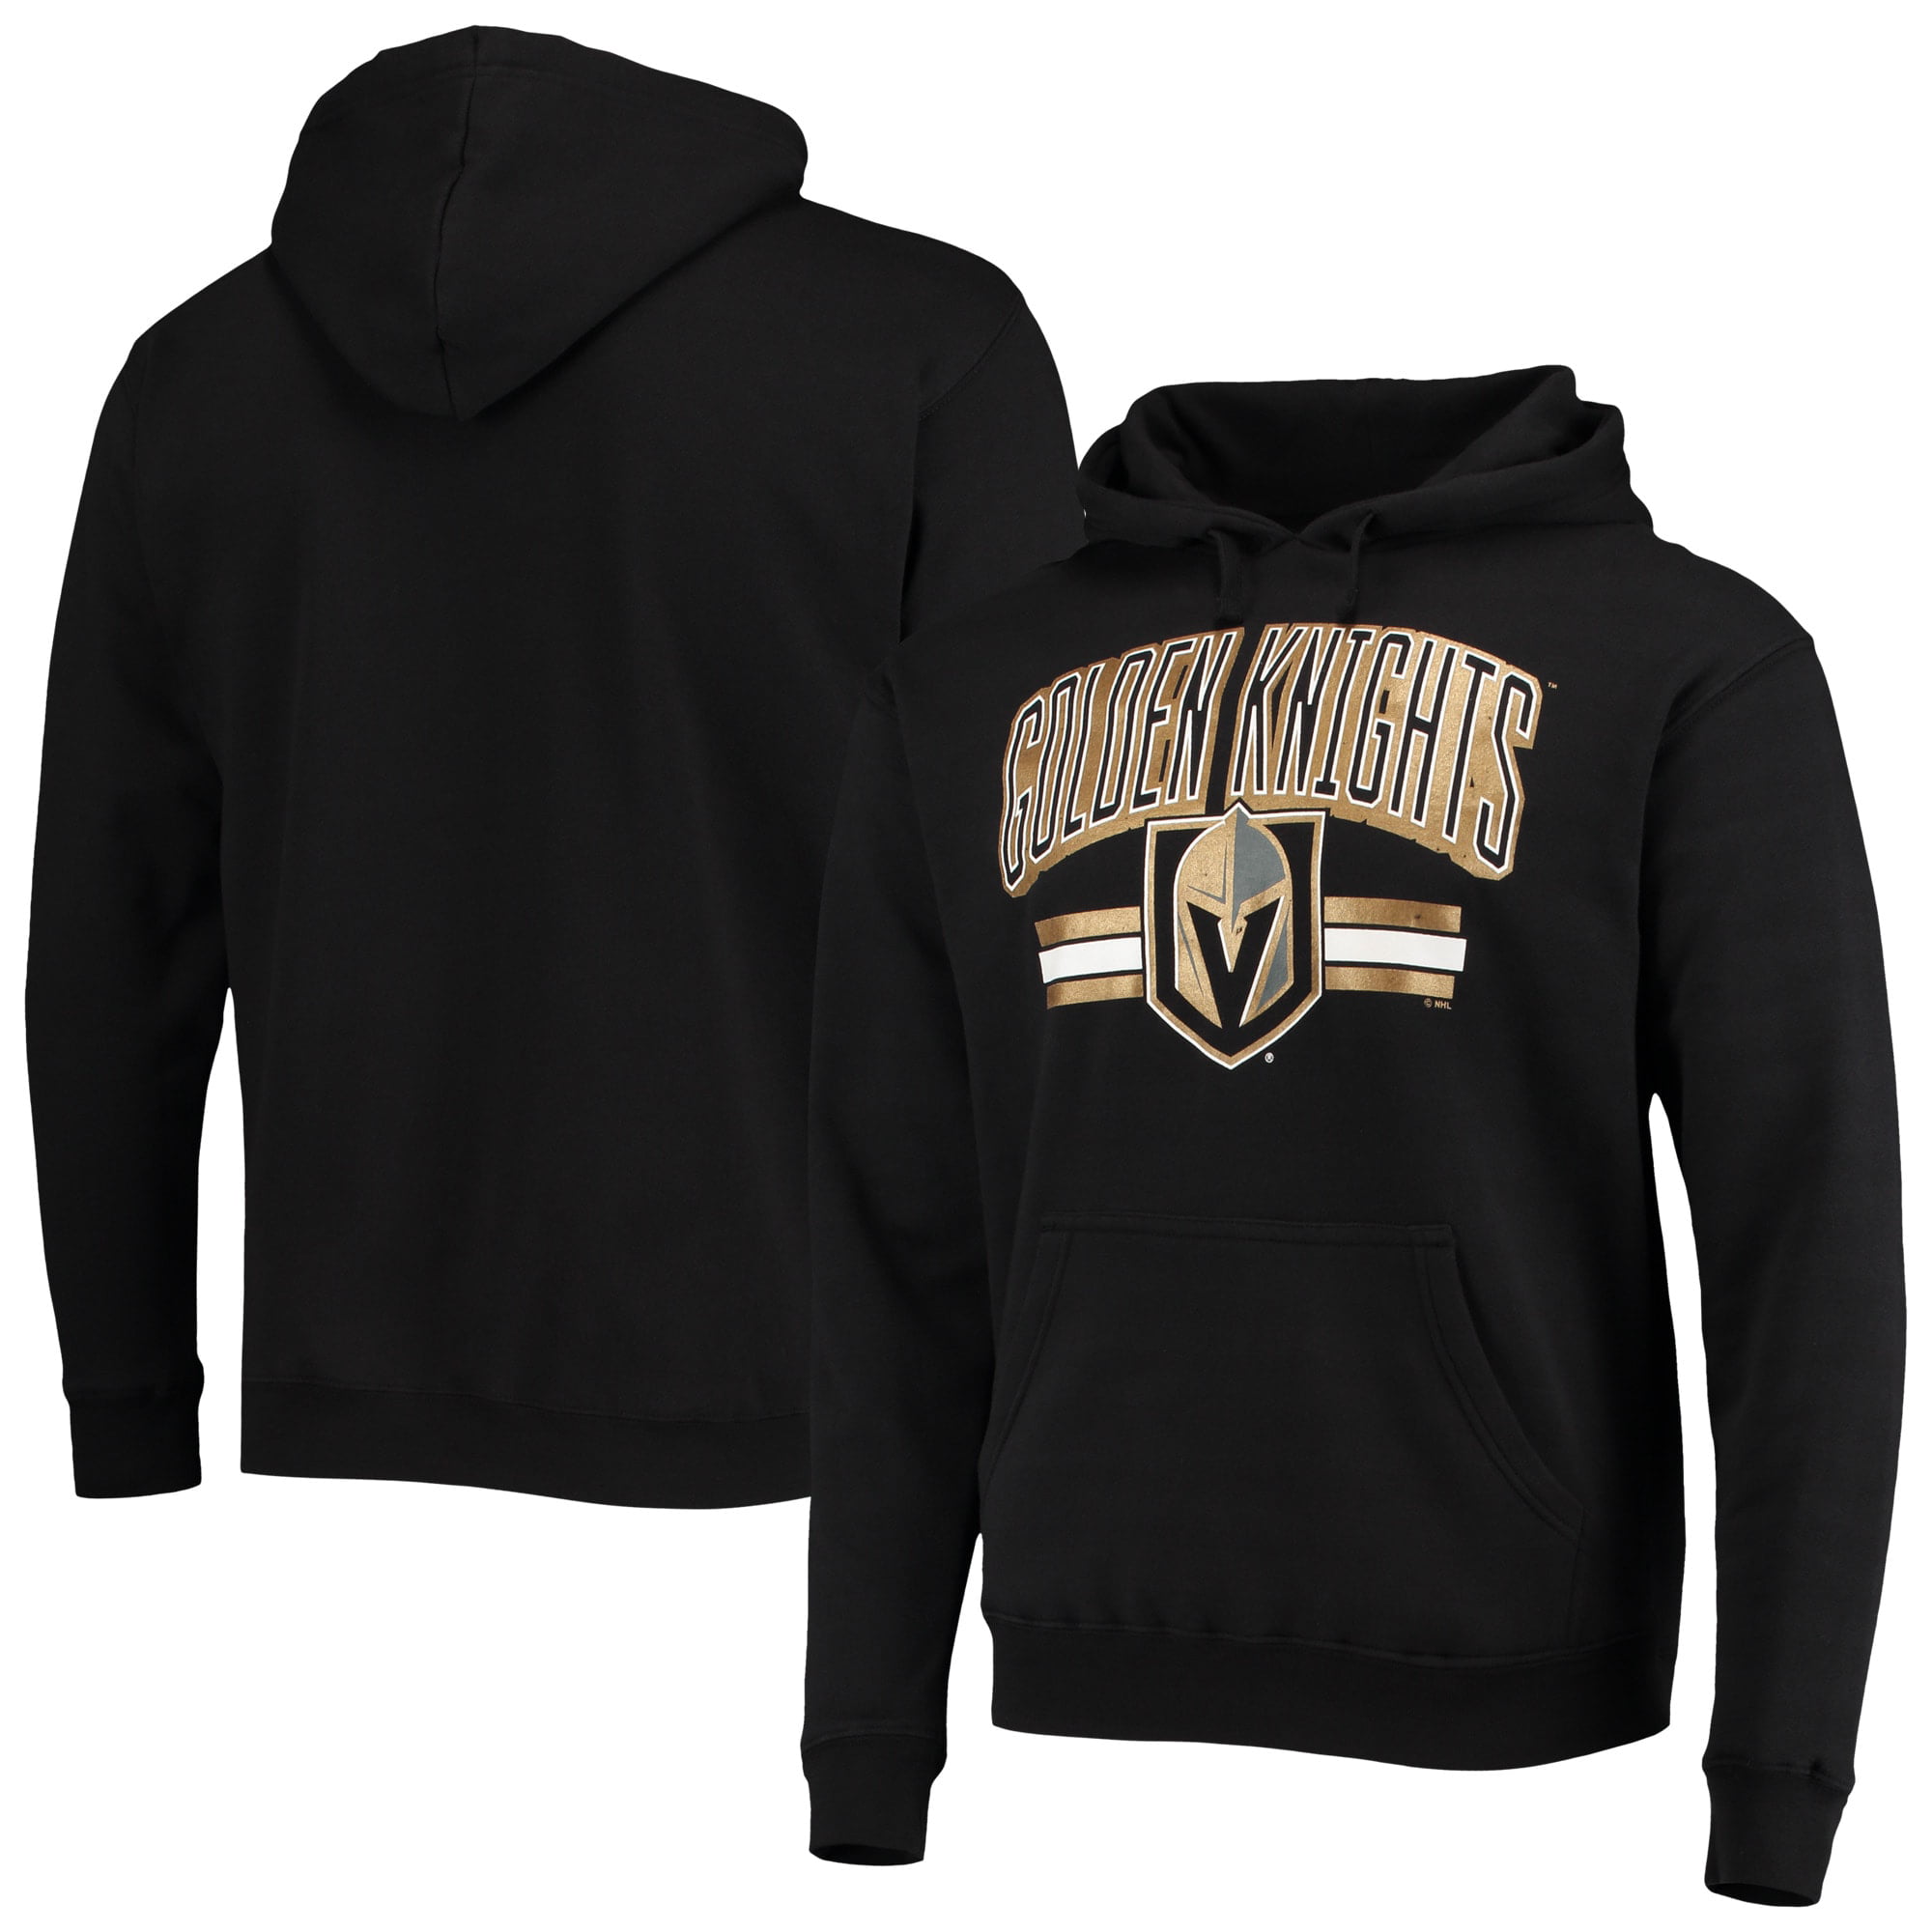 Womens Hooded Sweatshirt Pullover Vegas Born Golden Knights Cool Personality Design White